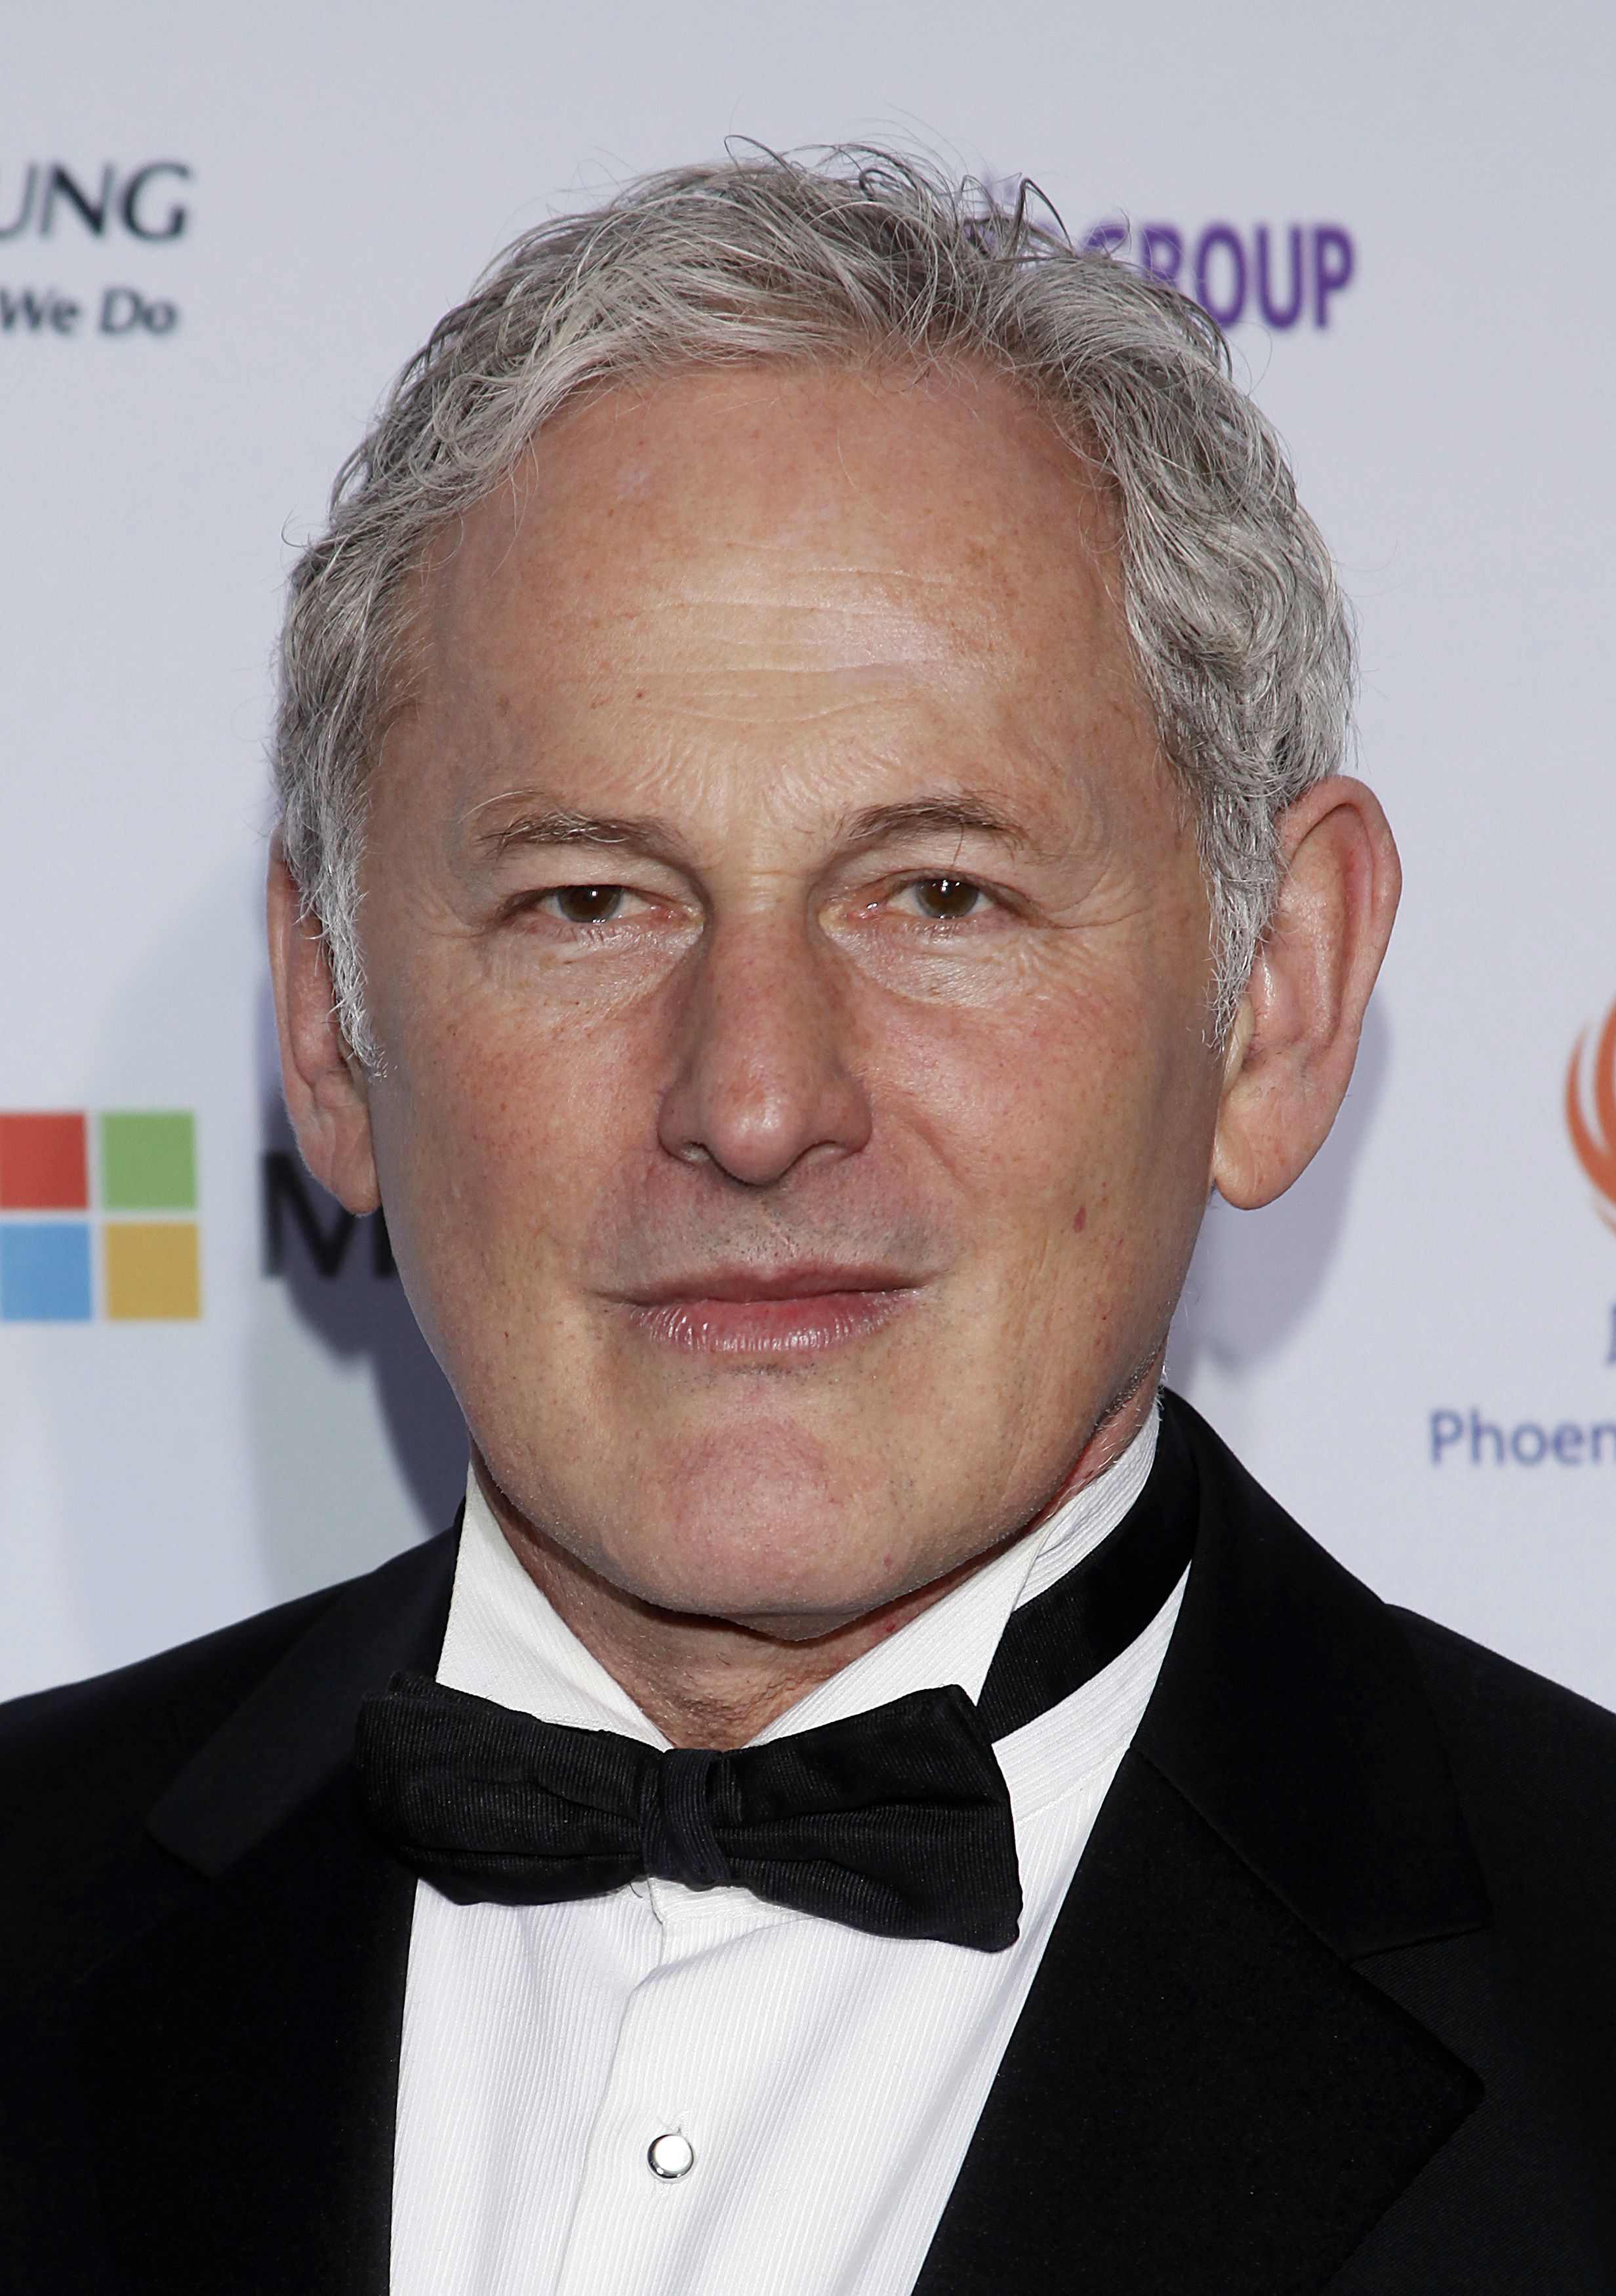 Victor Garber Deception And Titanic Actor Comes Out As Gay, Living With Longtime Partner Rainer Andreesen IBTimes